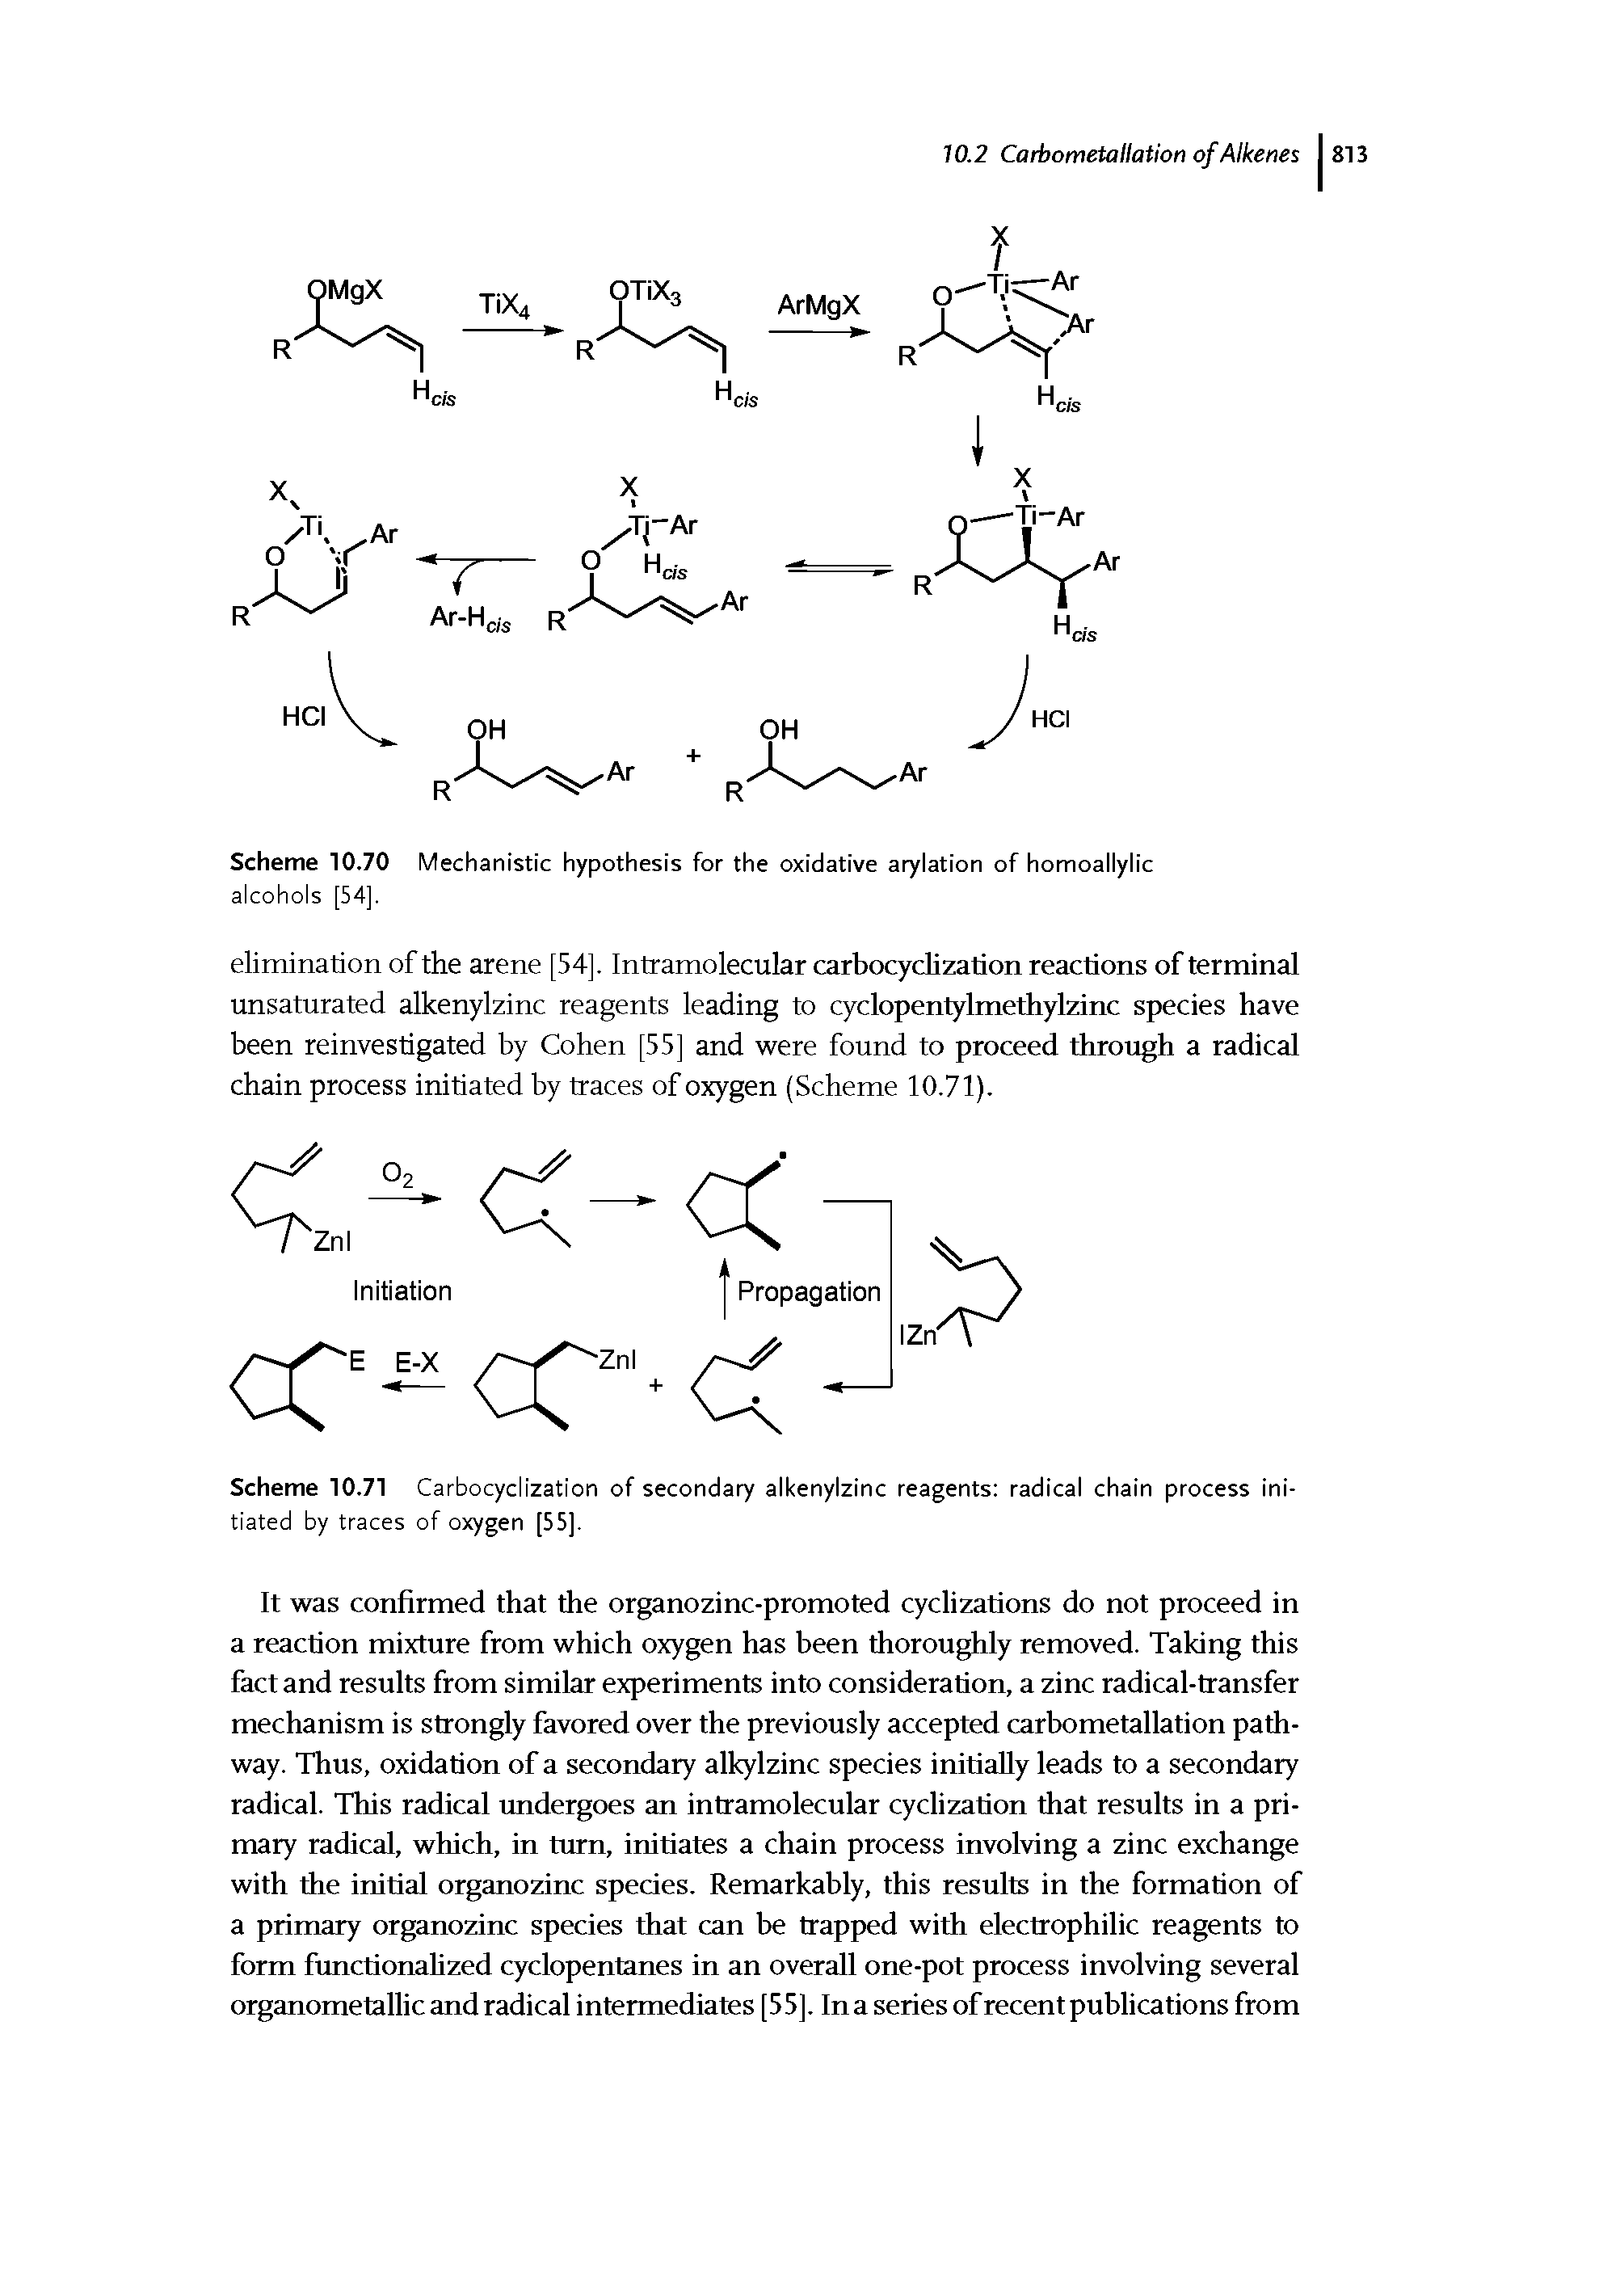 Scheme 10.71 Carbocydization of secondary alkenylzinc reagents radical chain process initiated by traces of oxygen [55].